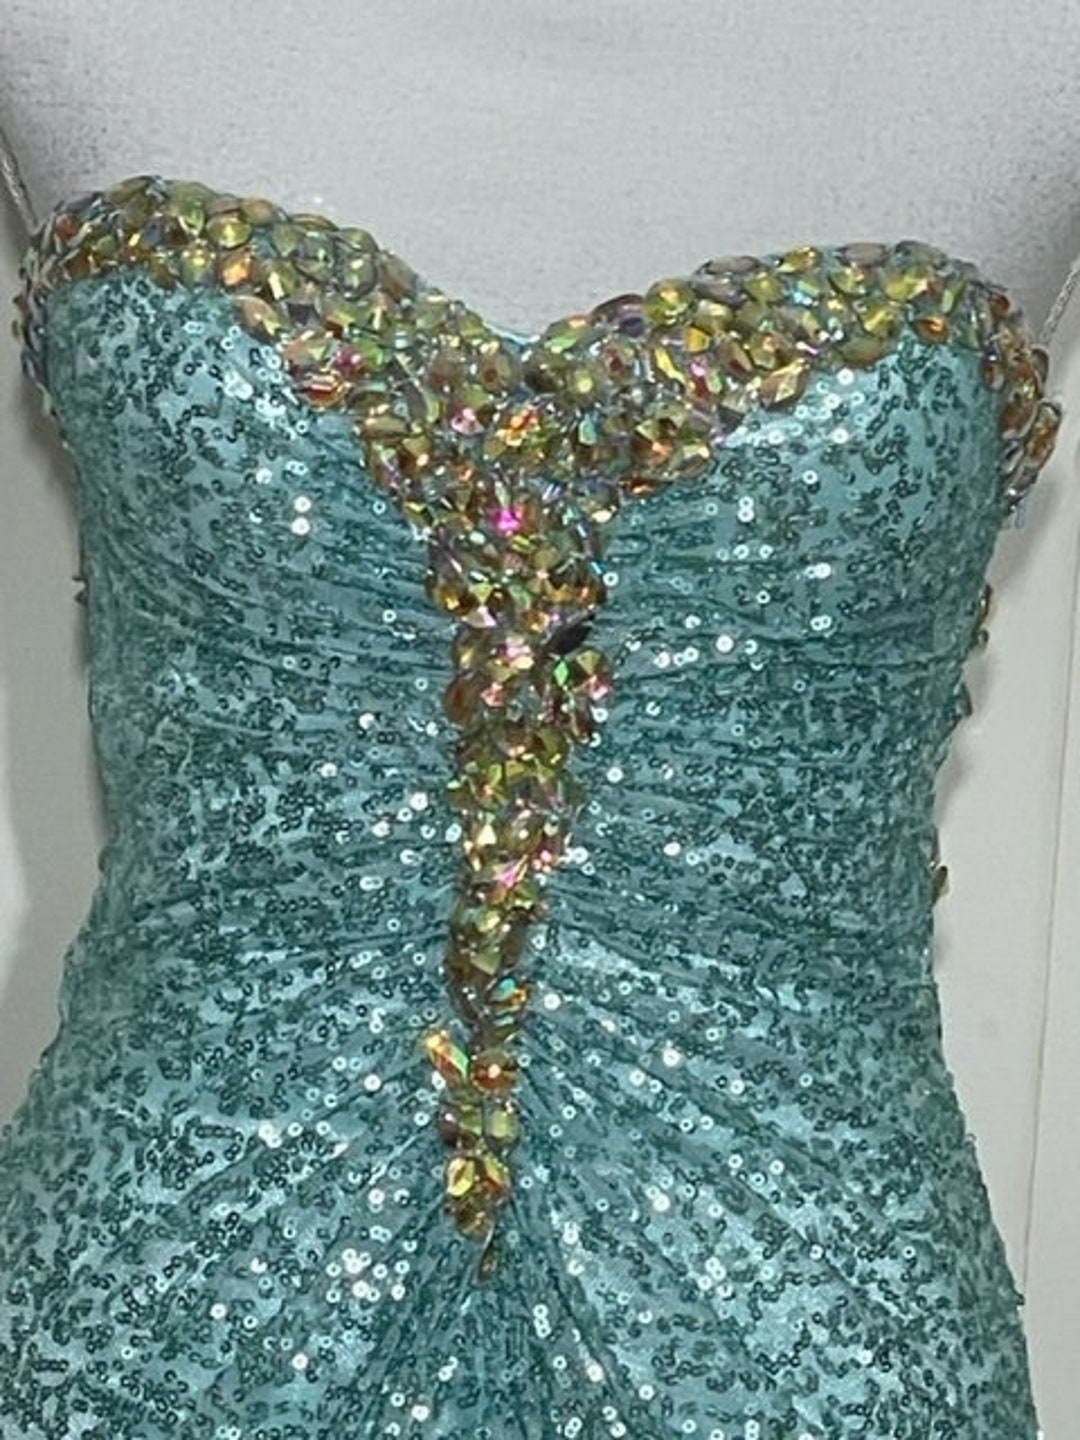 Aqua Sequin Gown With Gold Rhinestone Trim by Royal Queen - Etsy